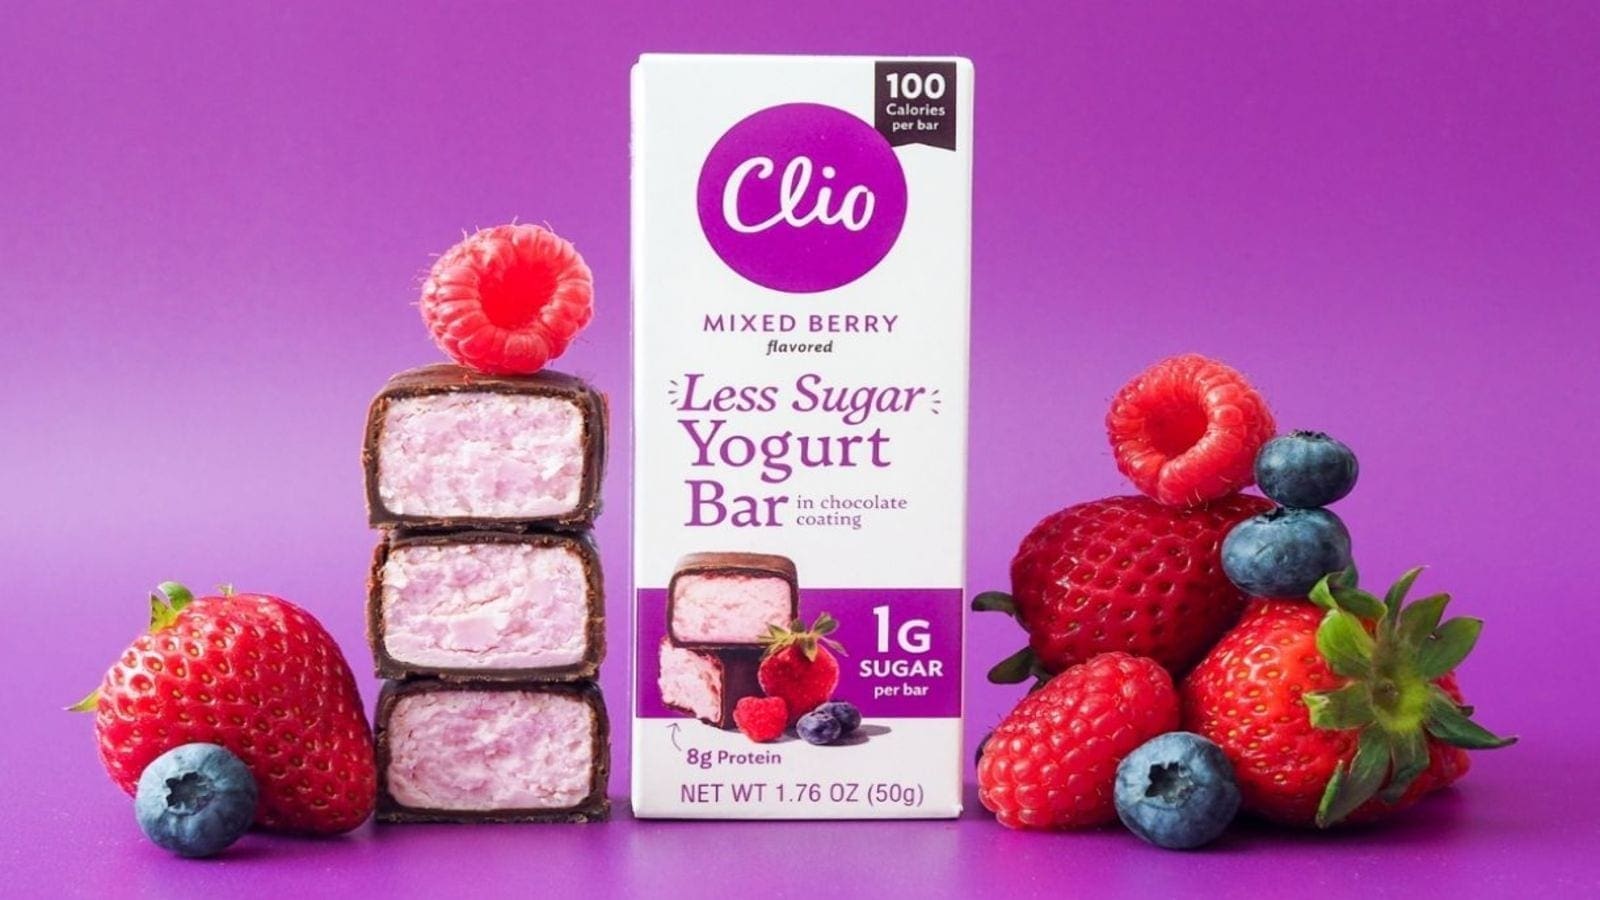 Clio Snacks launches new reduced-sugar yogurt bar line to attract new customers